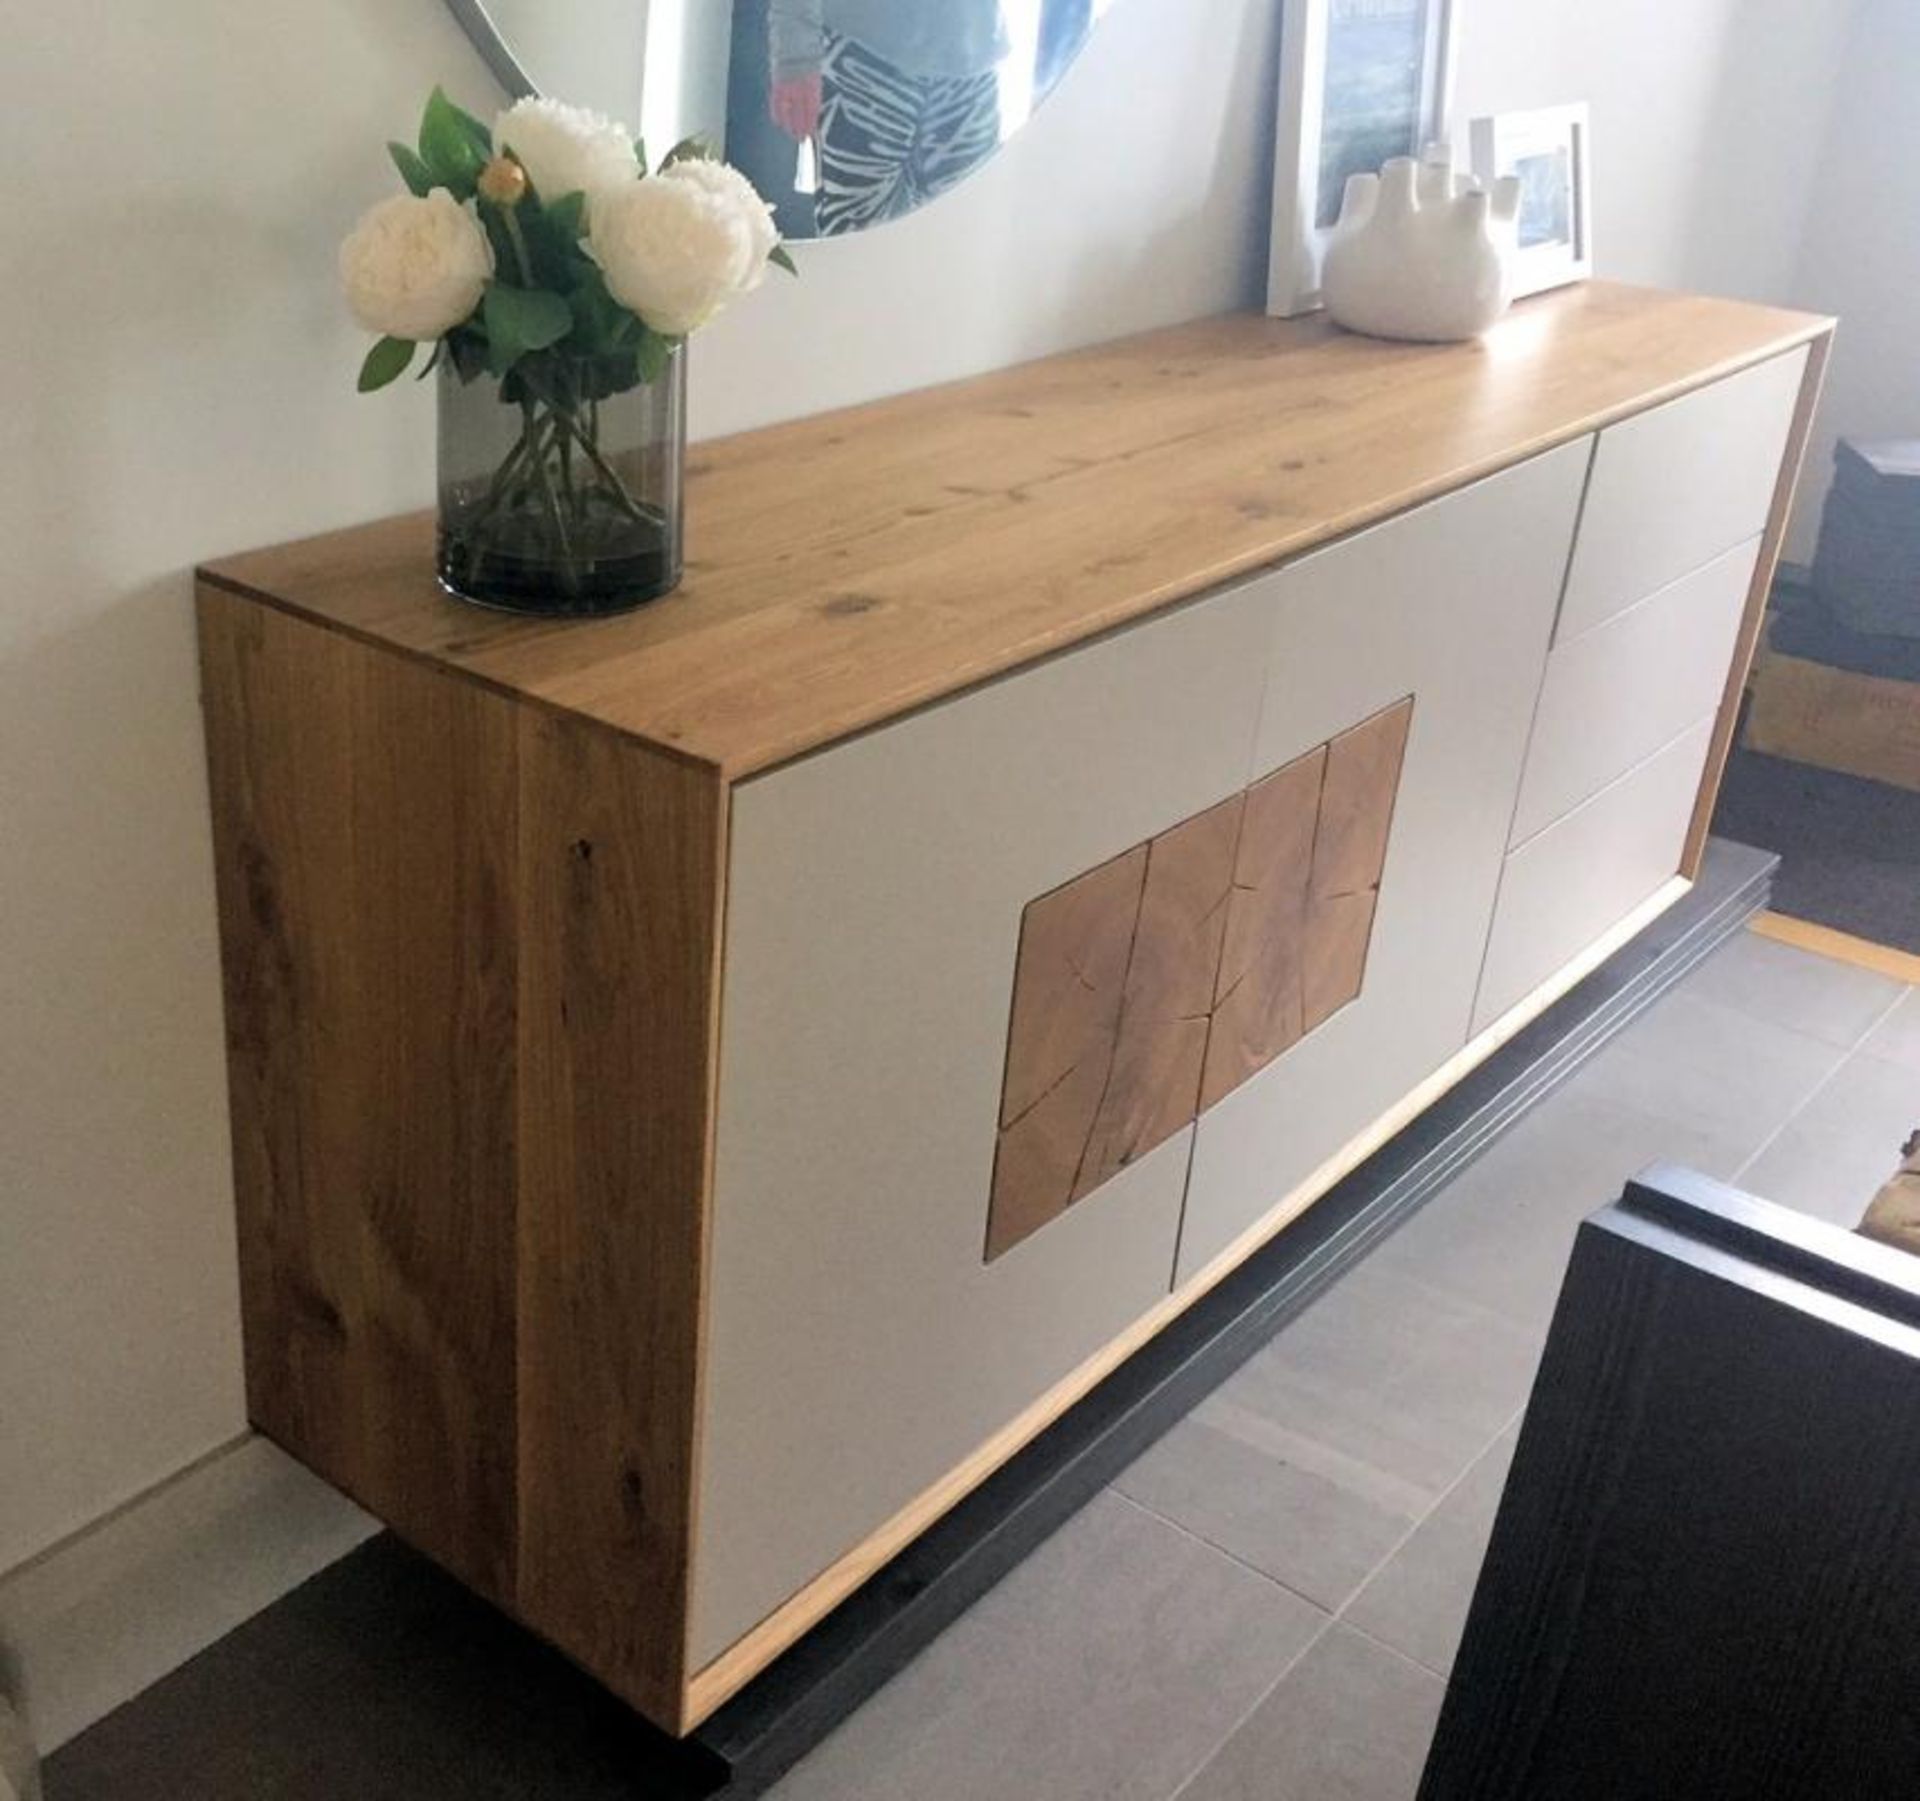 Stylish Wall Hung Wooden Sideboard Unit - 1715 x 420 x 650 (h) mm - CL502 - No VAT on the Hammer - L - Image 2 of 2